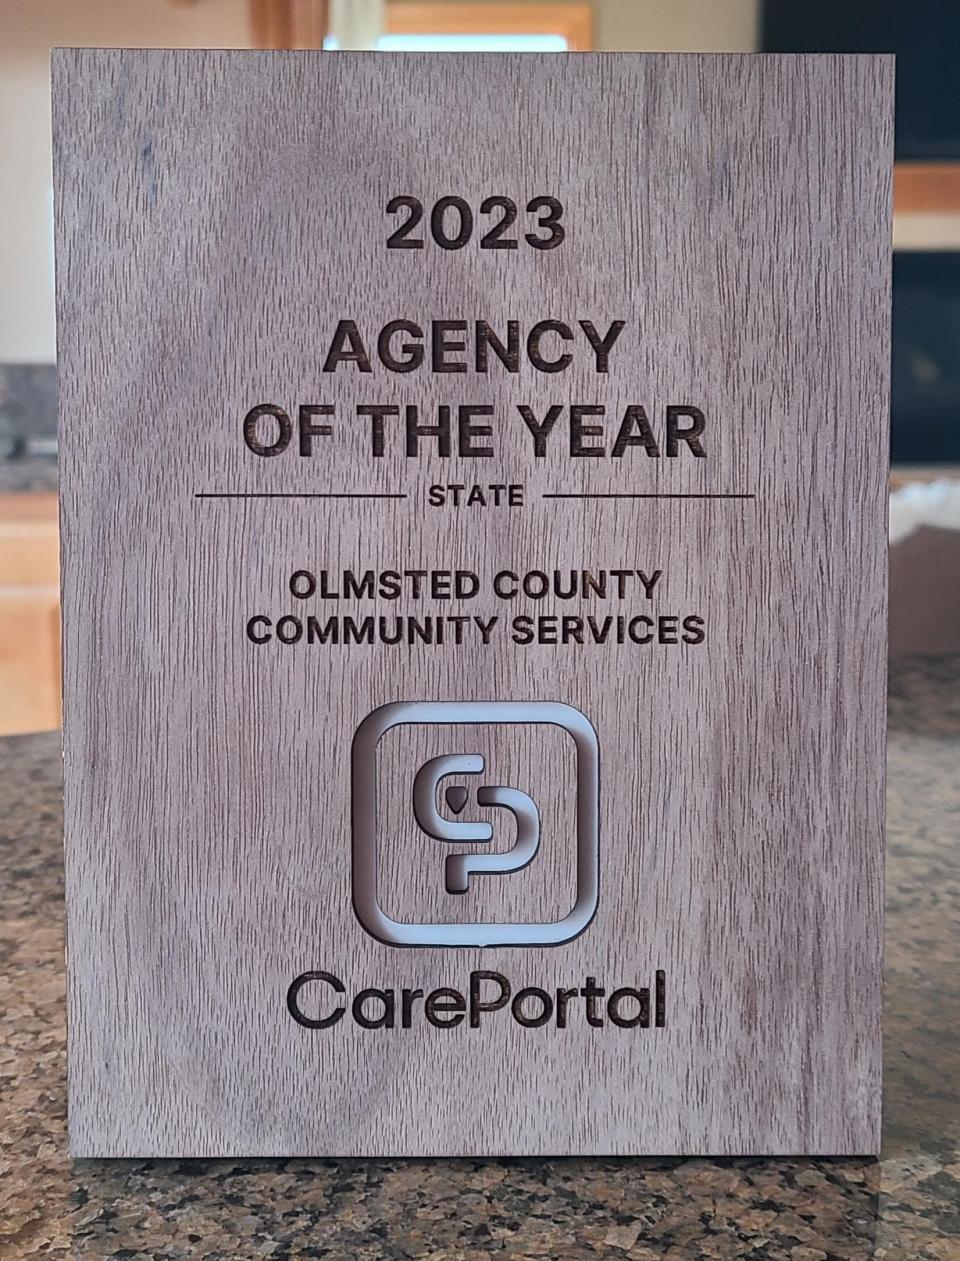 Olmsted County receives CarePortal’s 2023 Agency of the Year award